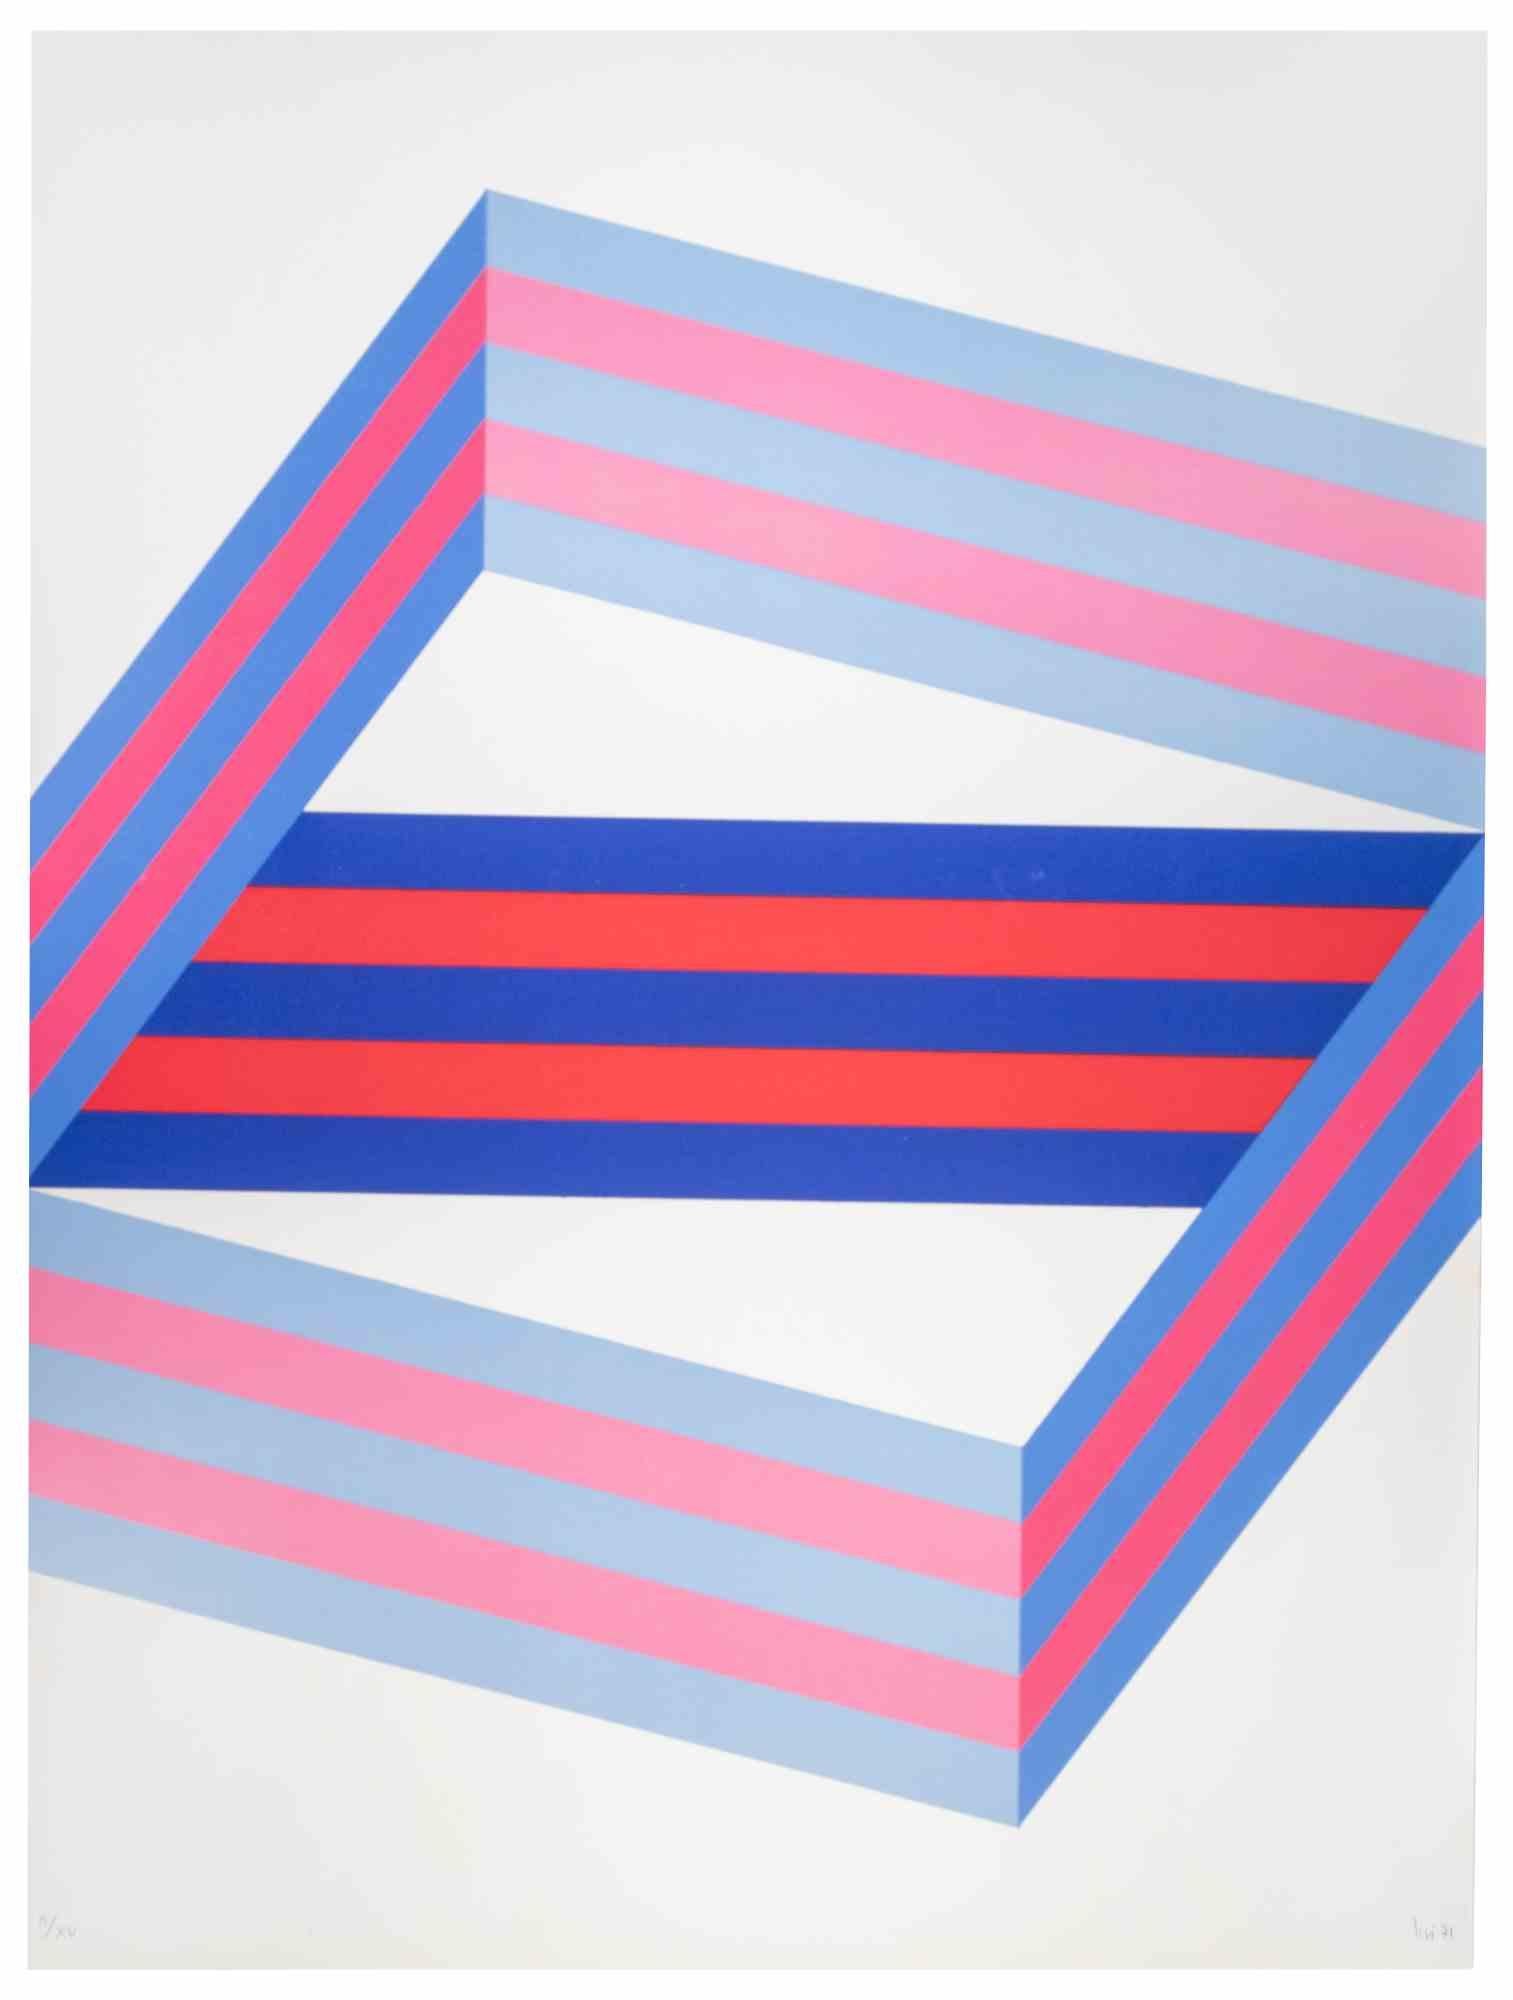 Perspective is a lithograph realized by Renato Livi in 1971.

Hand-signed and dated on the lower right margin.

Numbered on the lower left margin. Edition II/XV

Abstract composition on the tones of blue and pink, harmoniously realised by mastery of